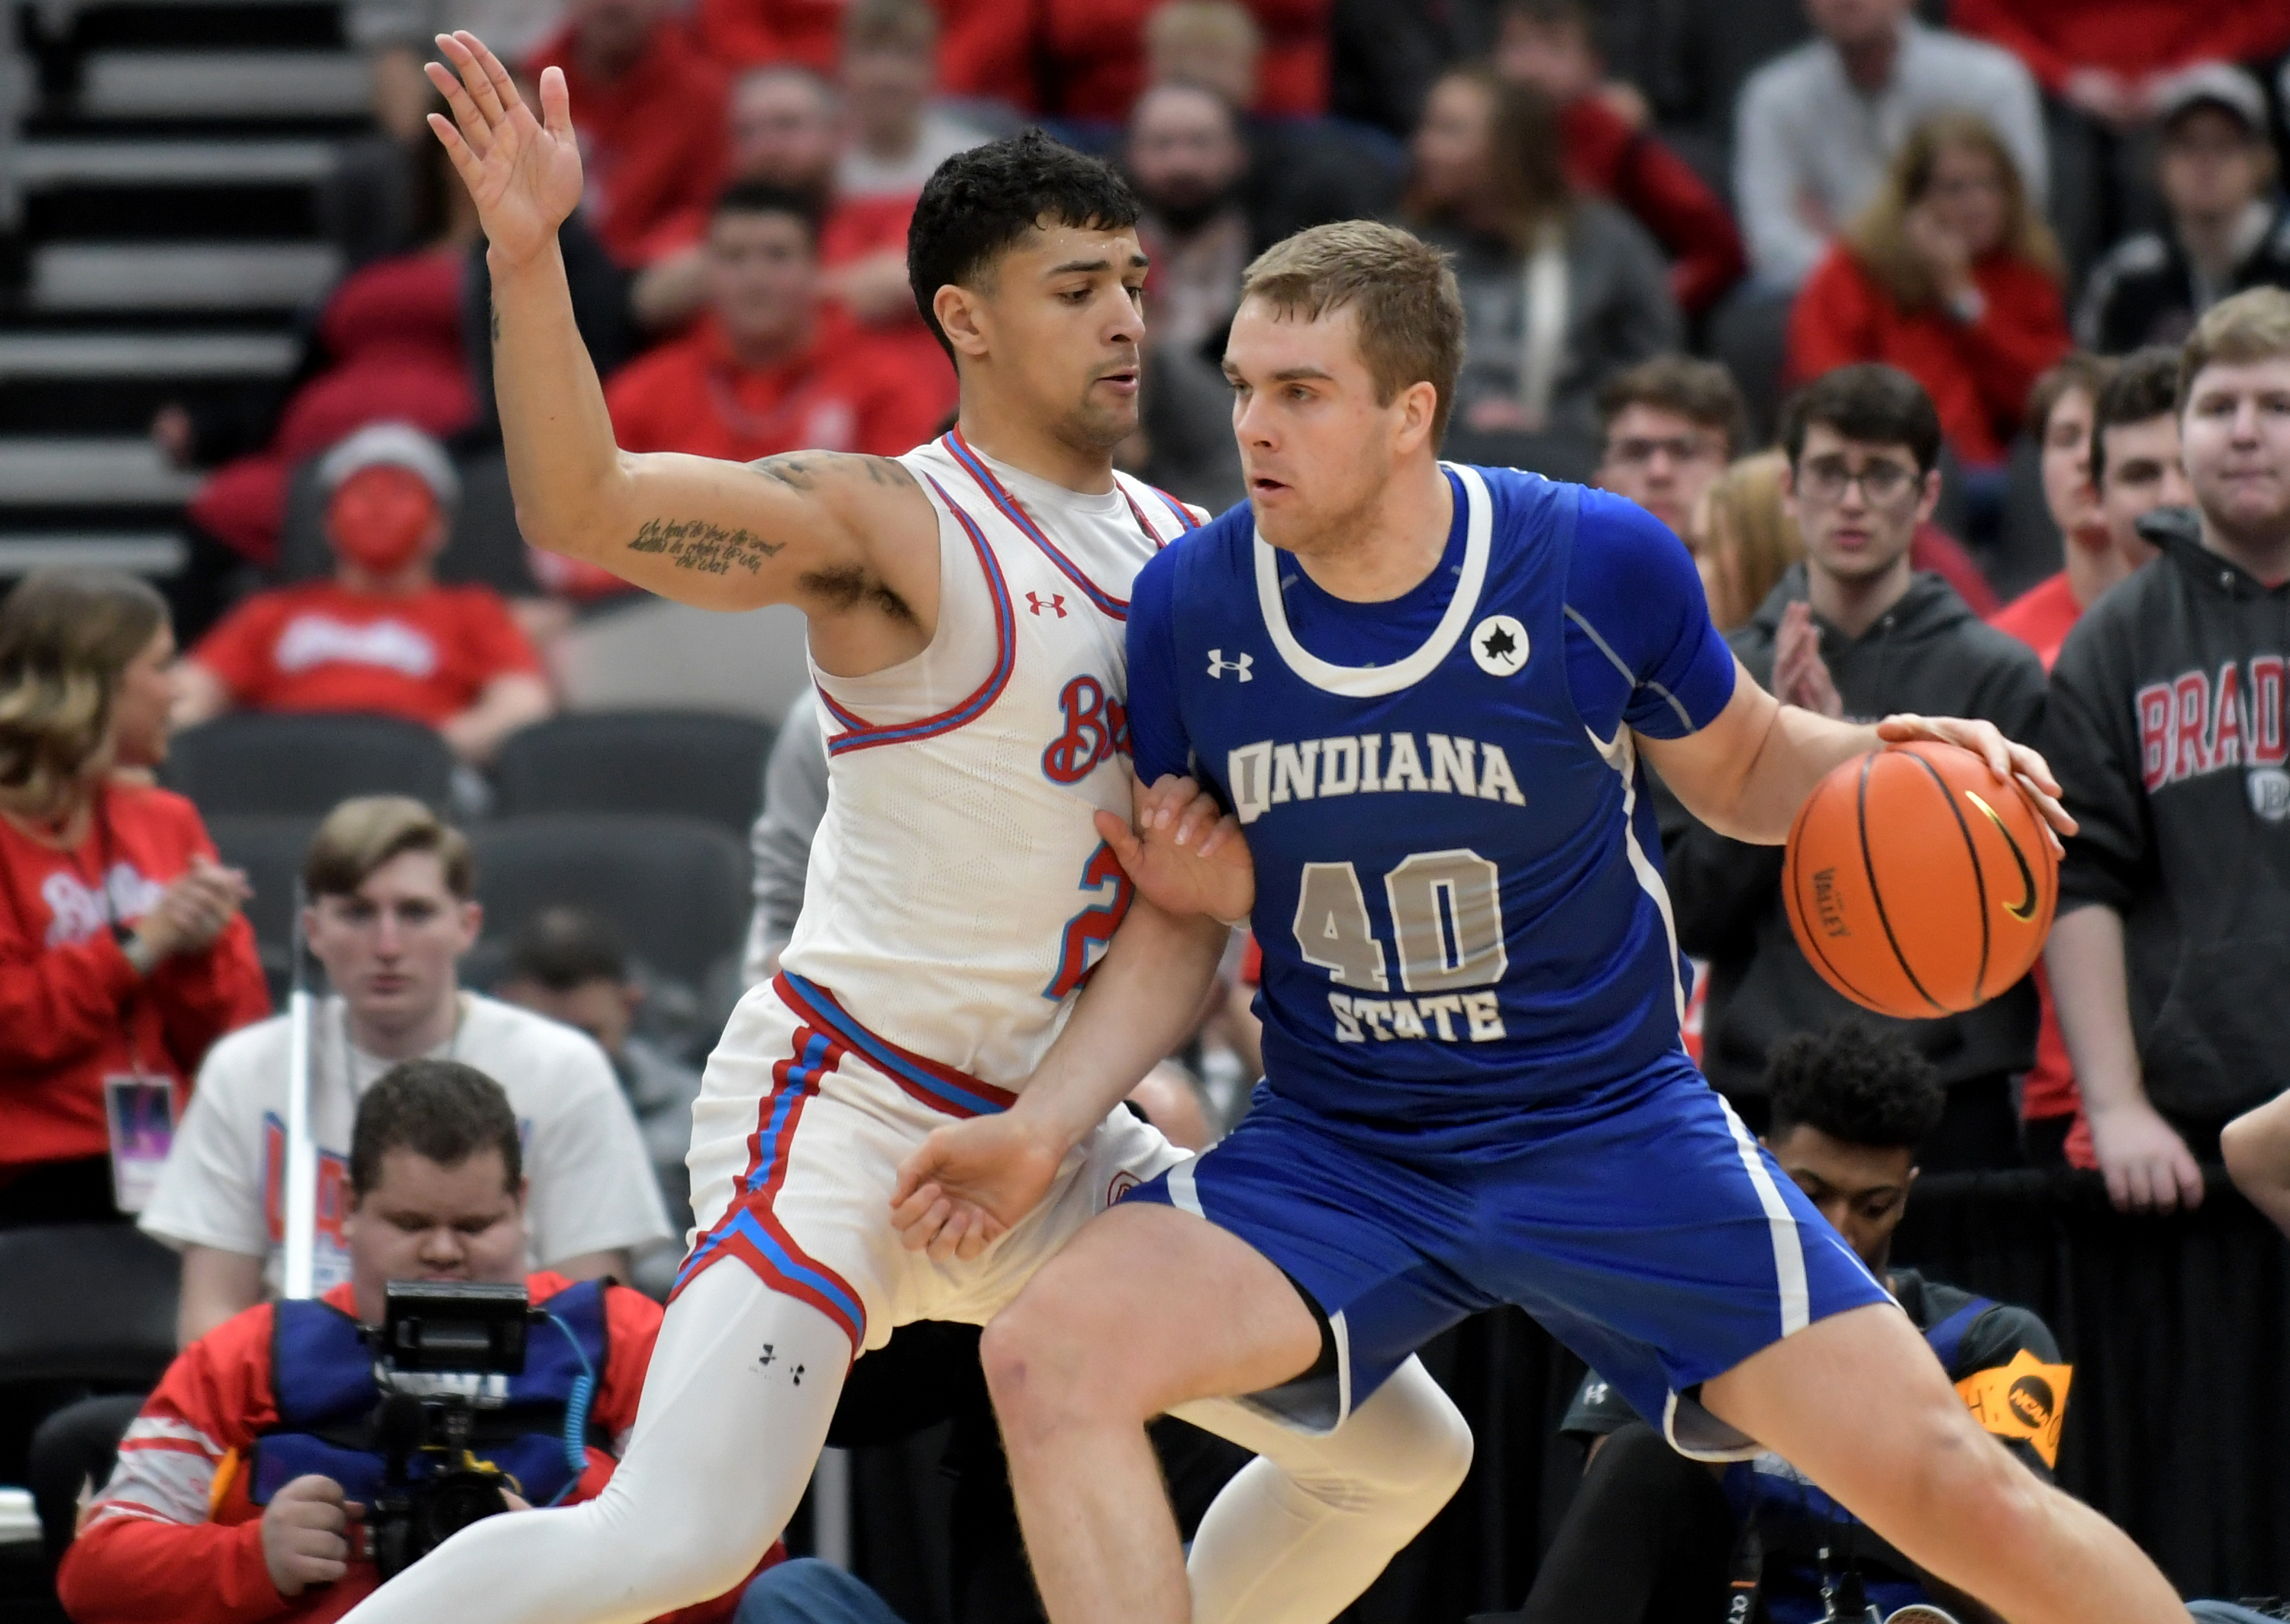 Indiana State Sycamores forward Cade McKnight drives the ball against Bradley Braves forward Ja’Shon Henry during the first half at Enterprise Center.